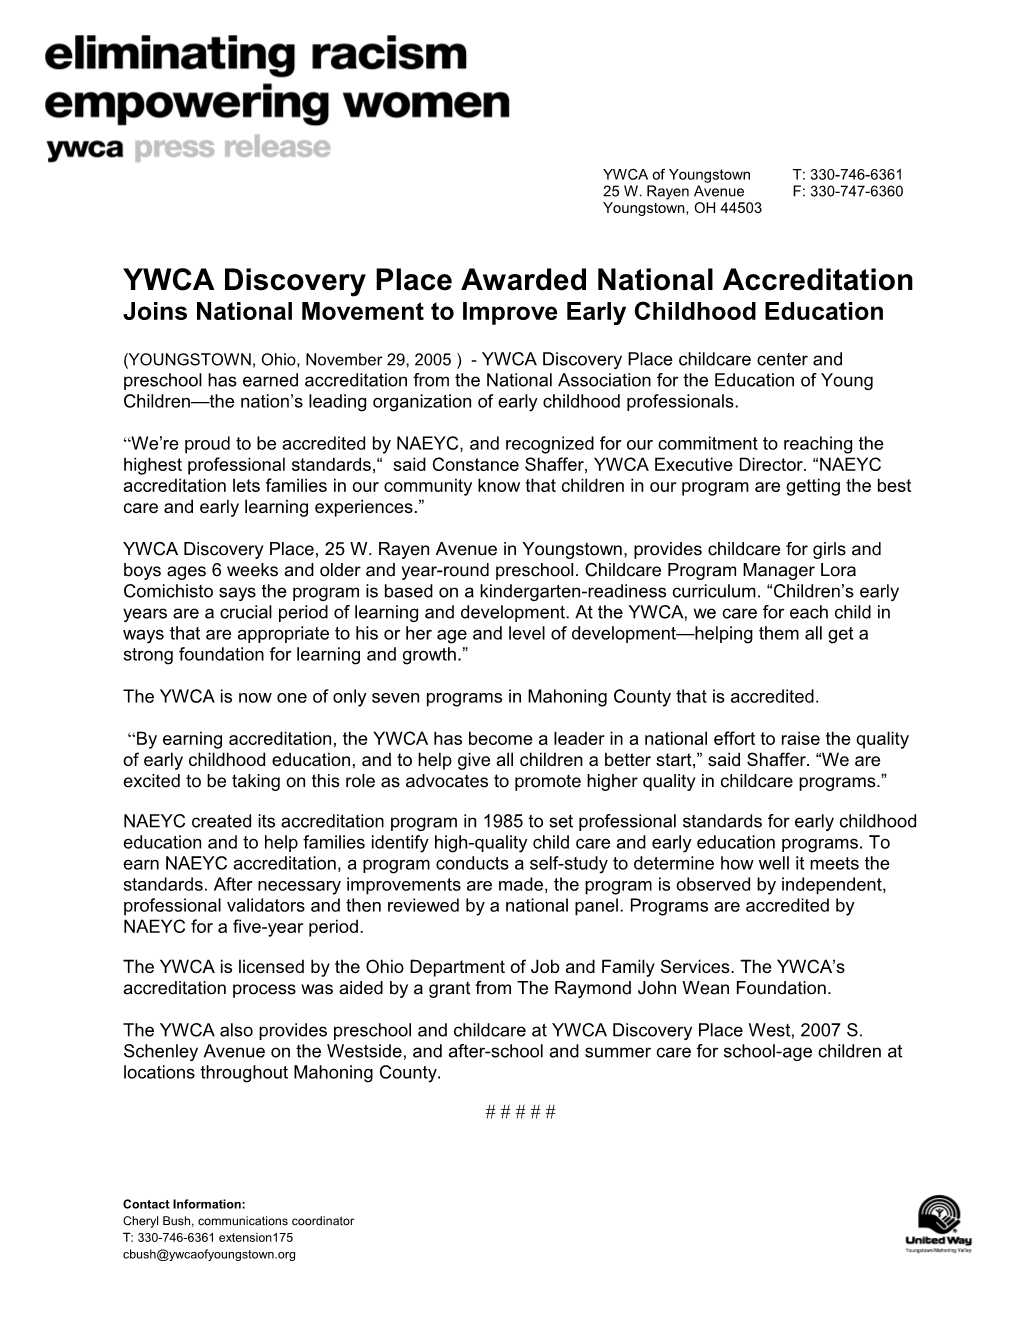 YWCA Discovery Place Awarded National Accreditation